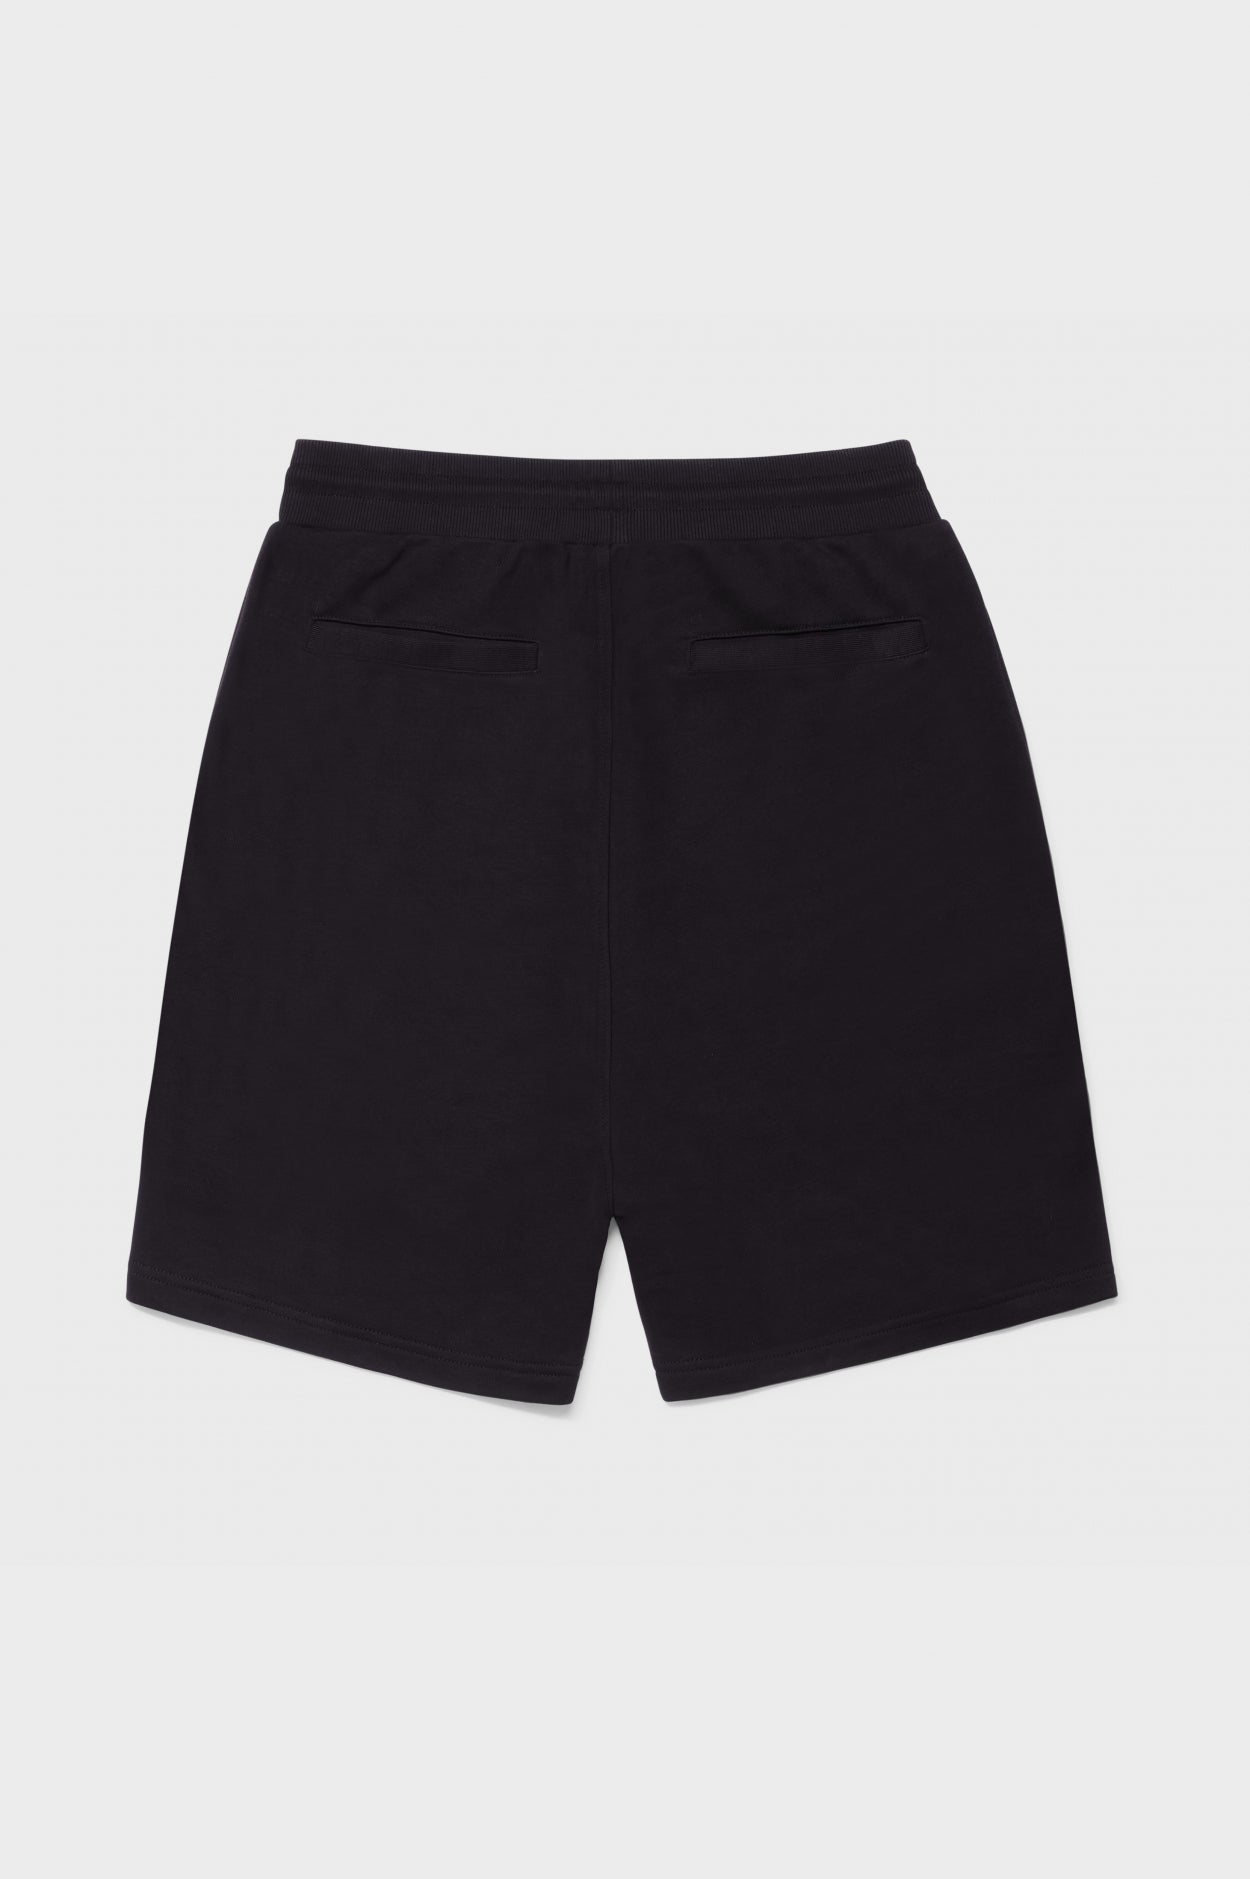 ZION SHORTS | BLACK & RED